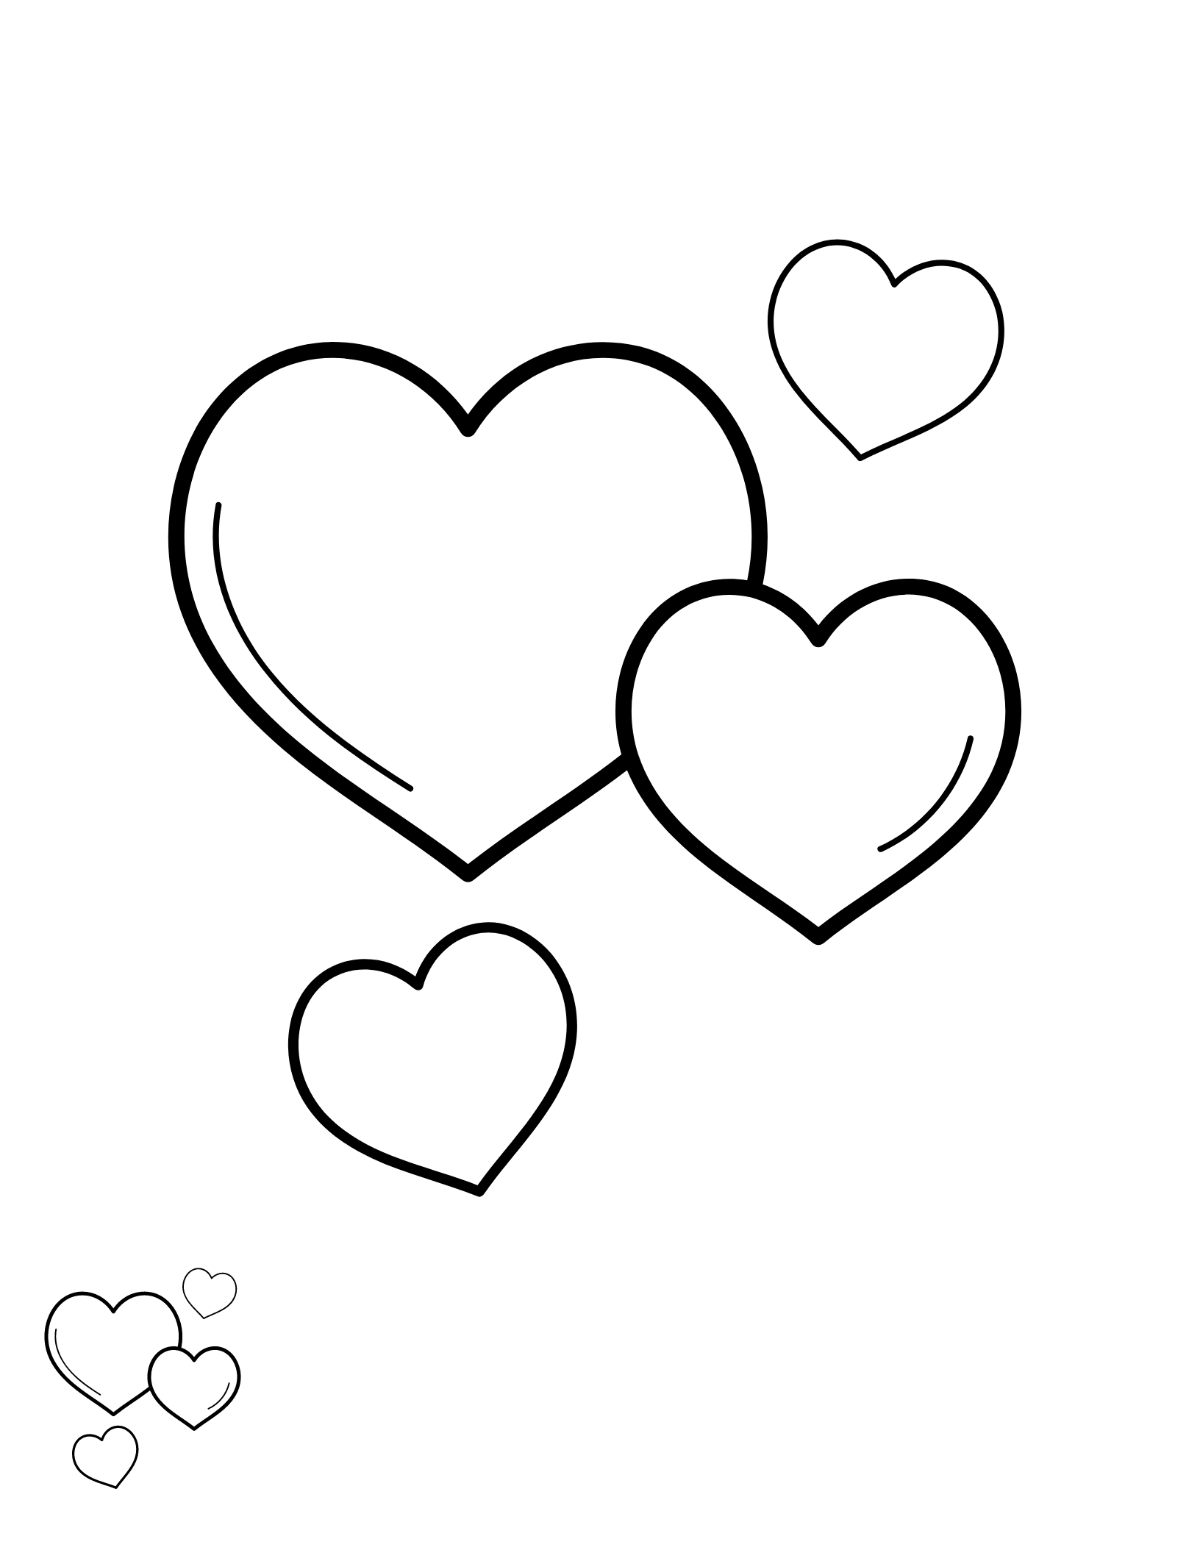 Easy Heart Coloring Page for Kids Template